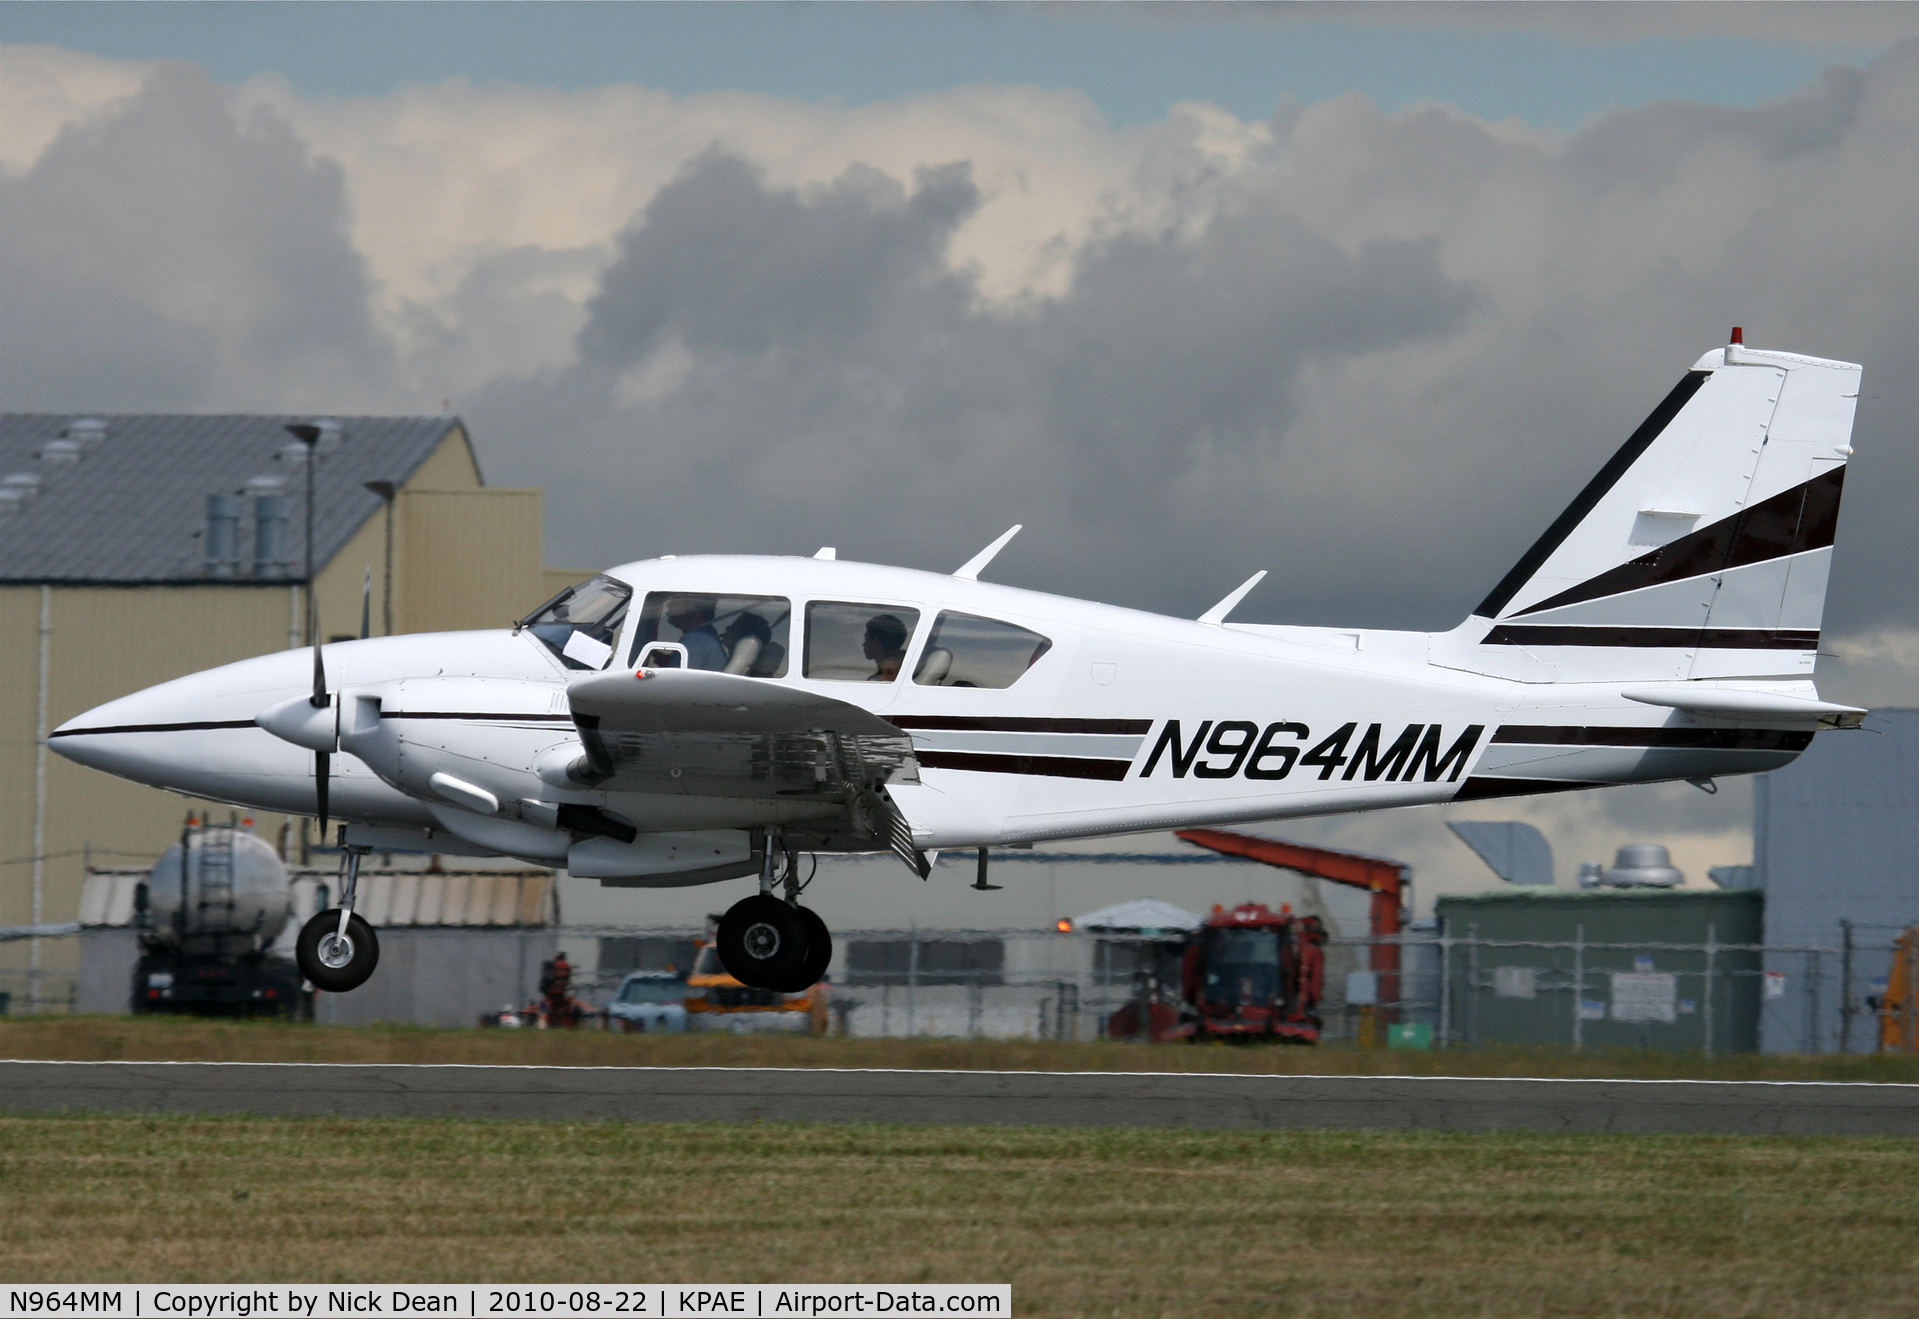 N964MM, 1978 Piper PA-23-250 Aztec C/N 27-7854132, KPAE Arriving on 34L from KCOE